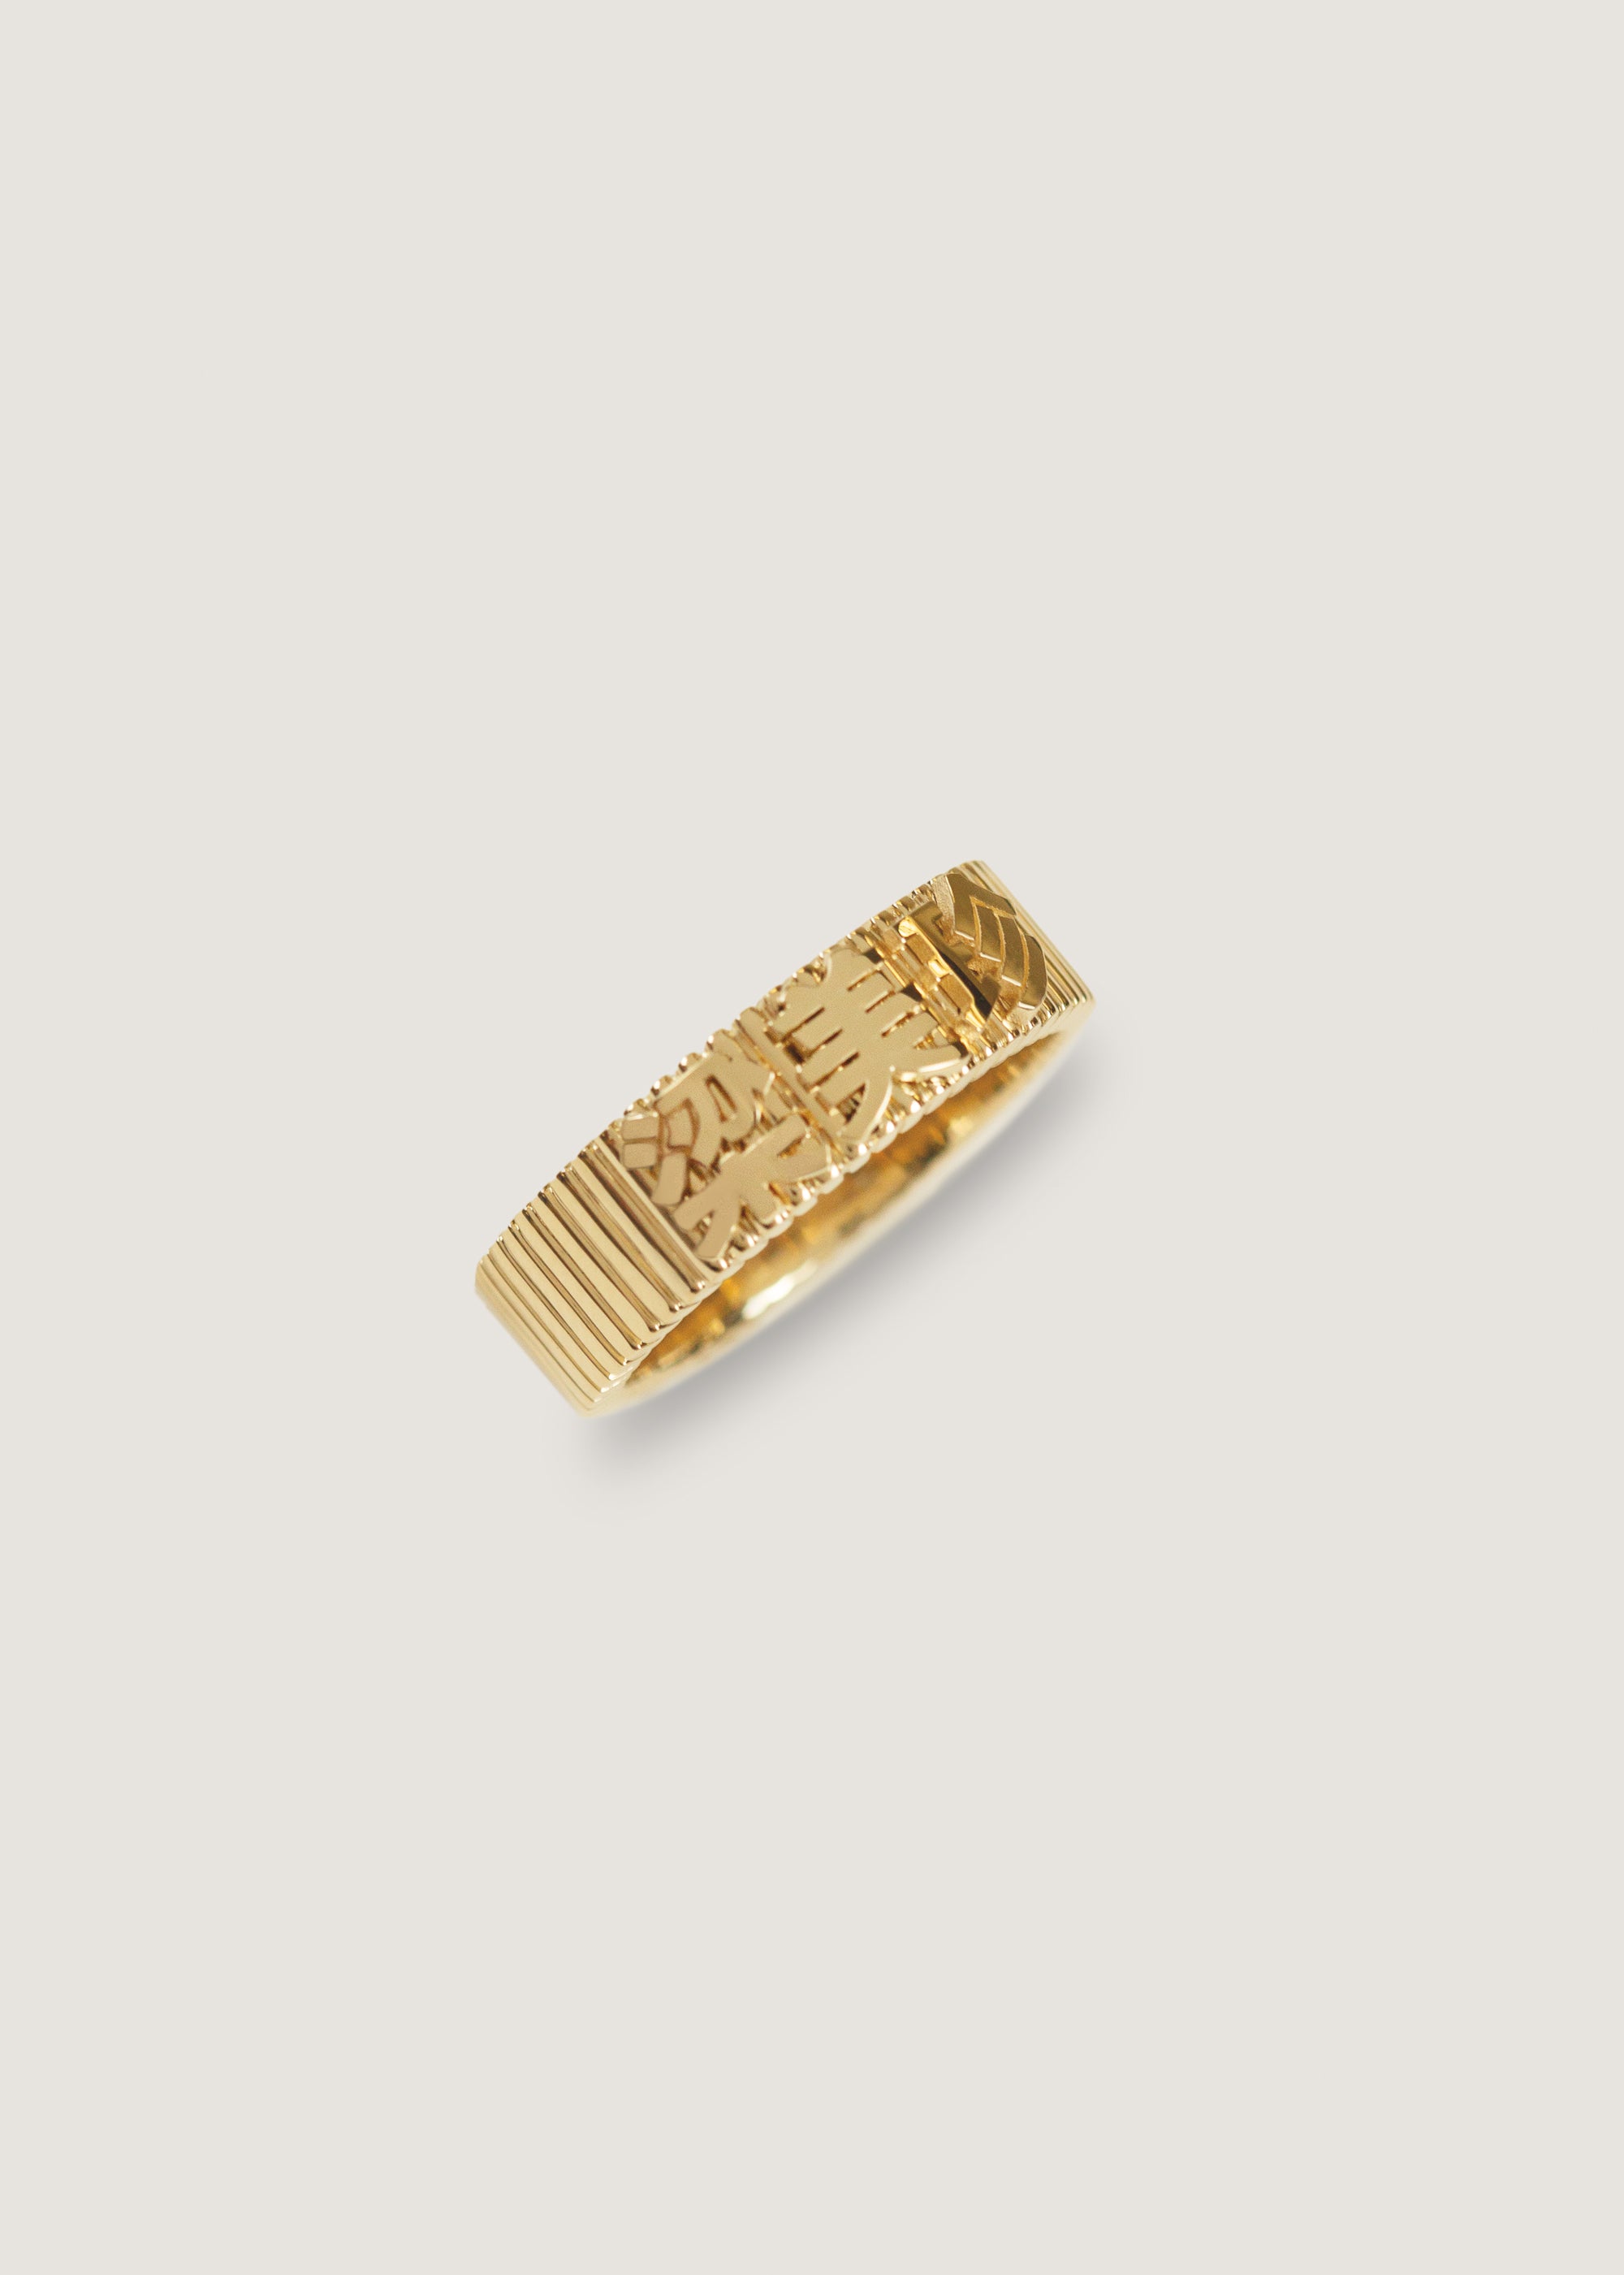 alt="Heritage Ribbed Name Ring - Chinese"